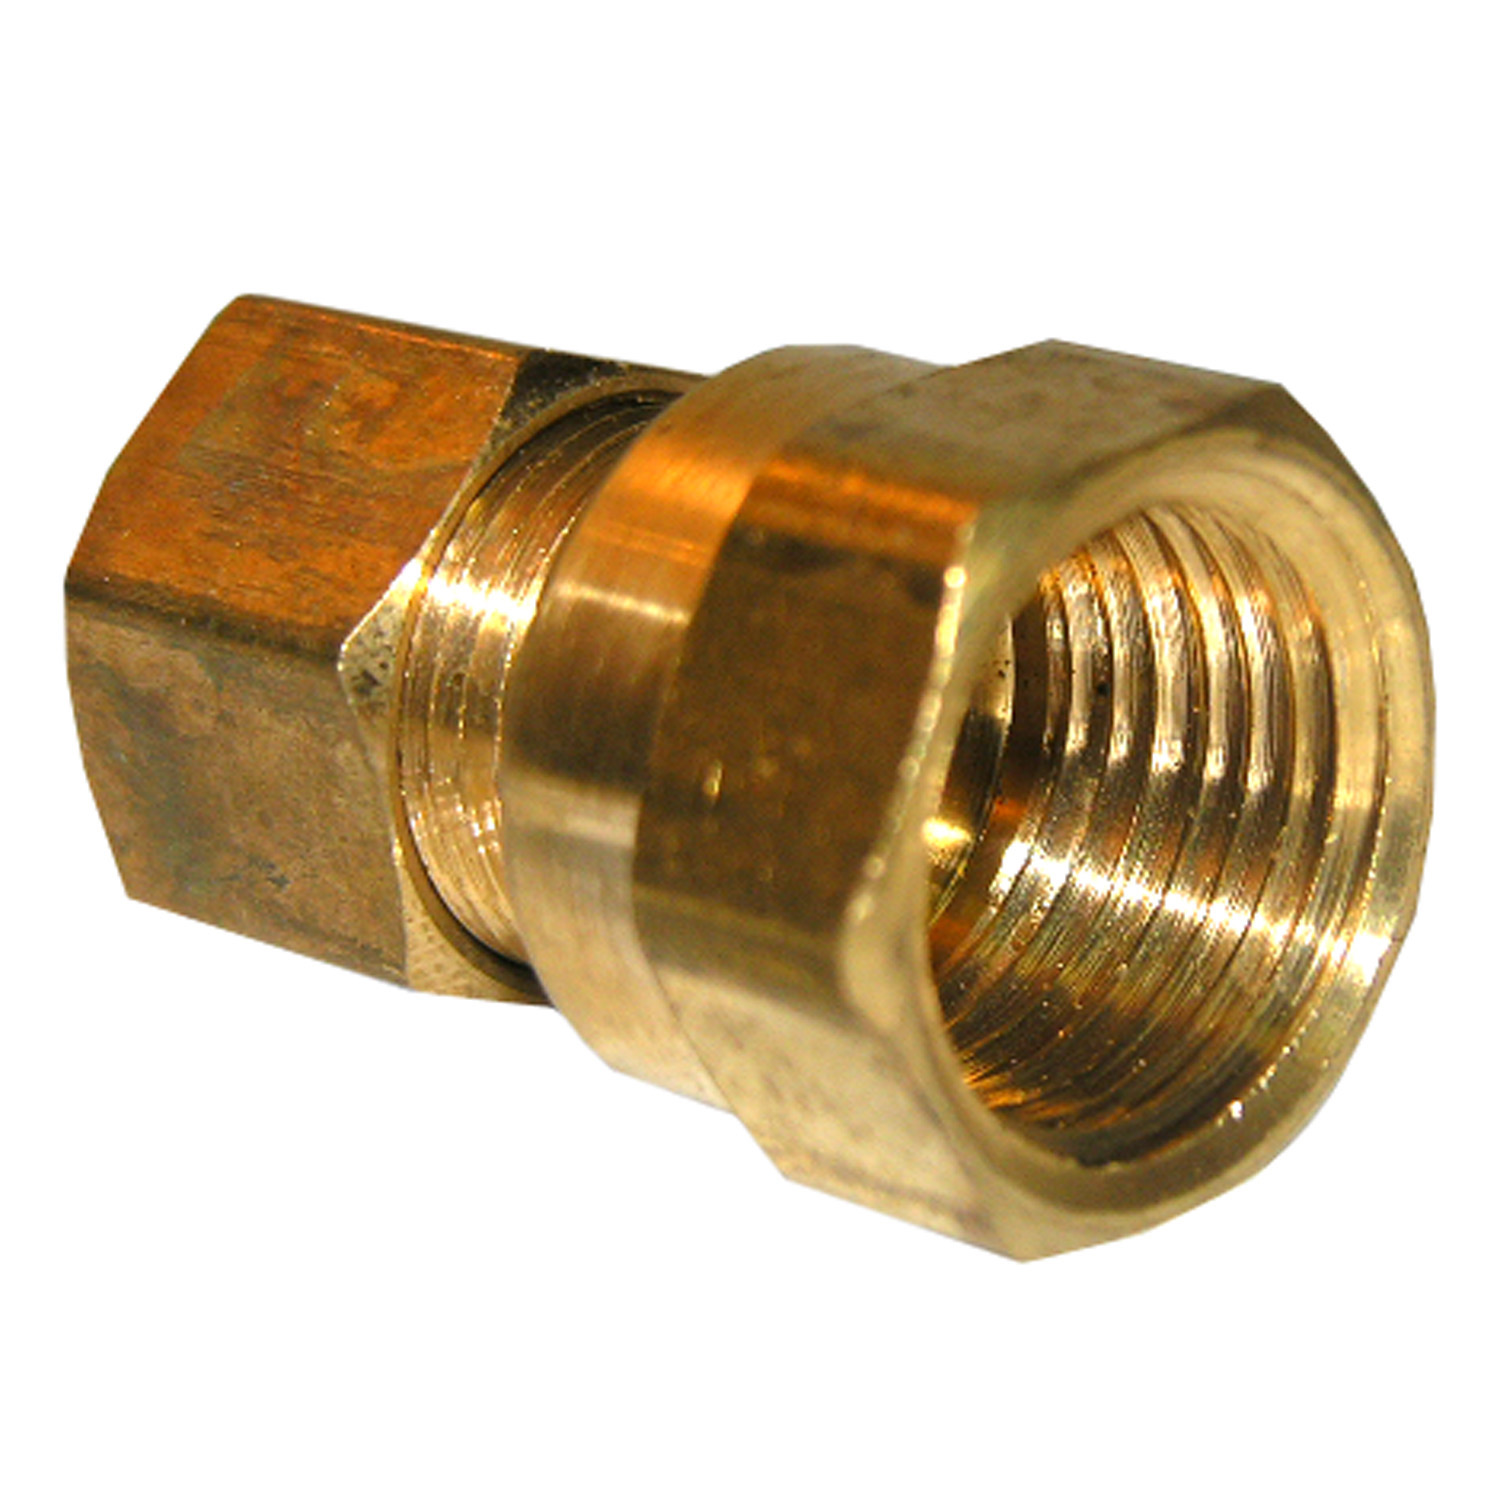 17-6635 Pipe Adapter, 3/8 in, Compression x FPT, Brass, 150 psi Pressure